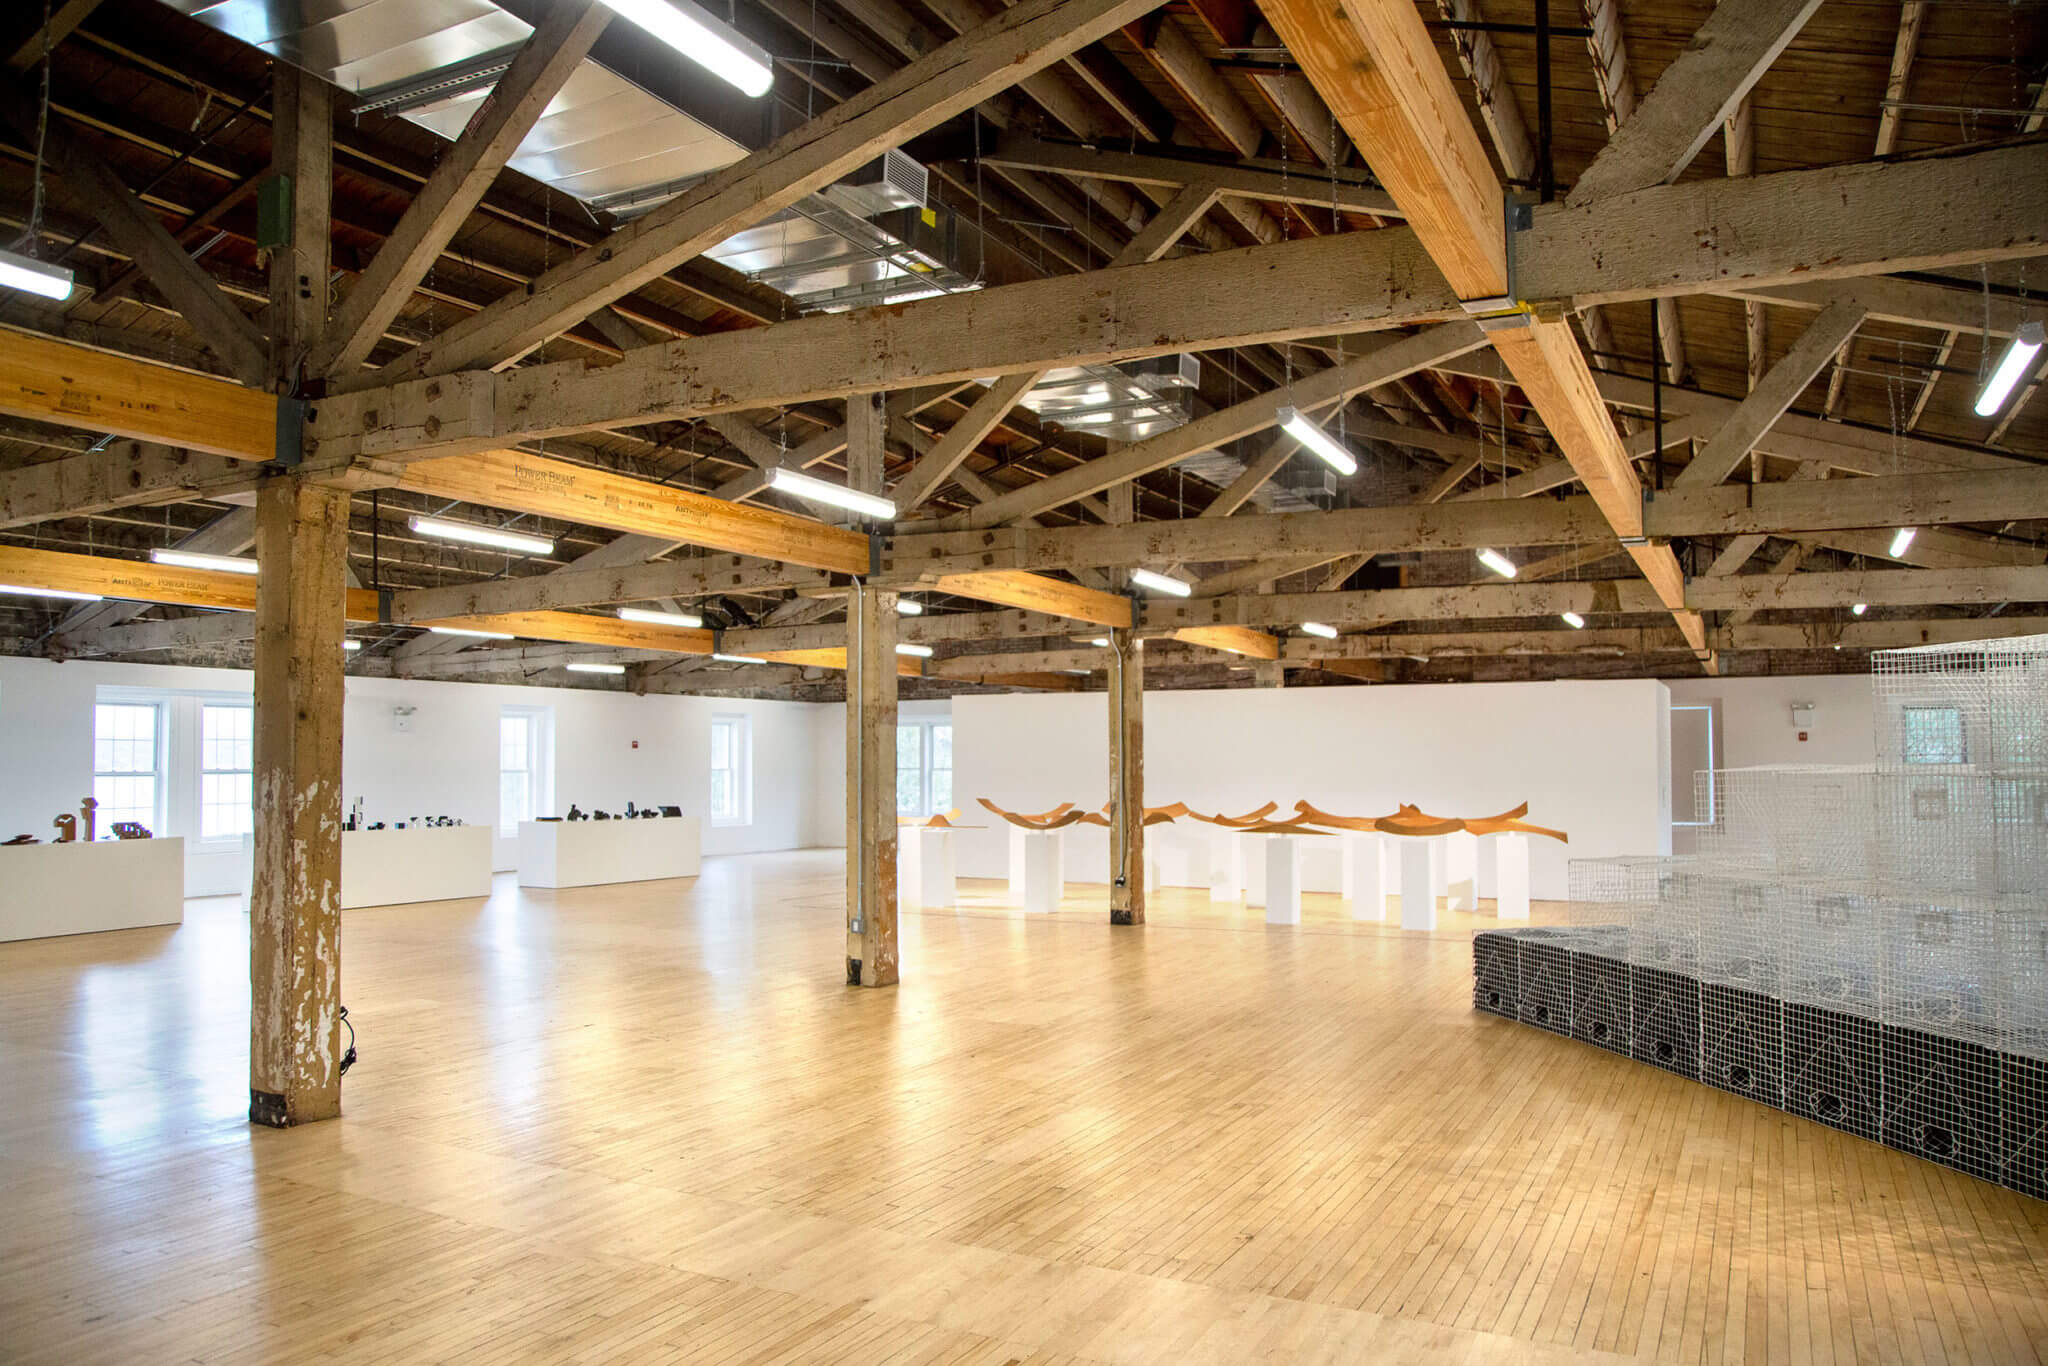 Interior of a renovated arts space with exposed trusses